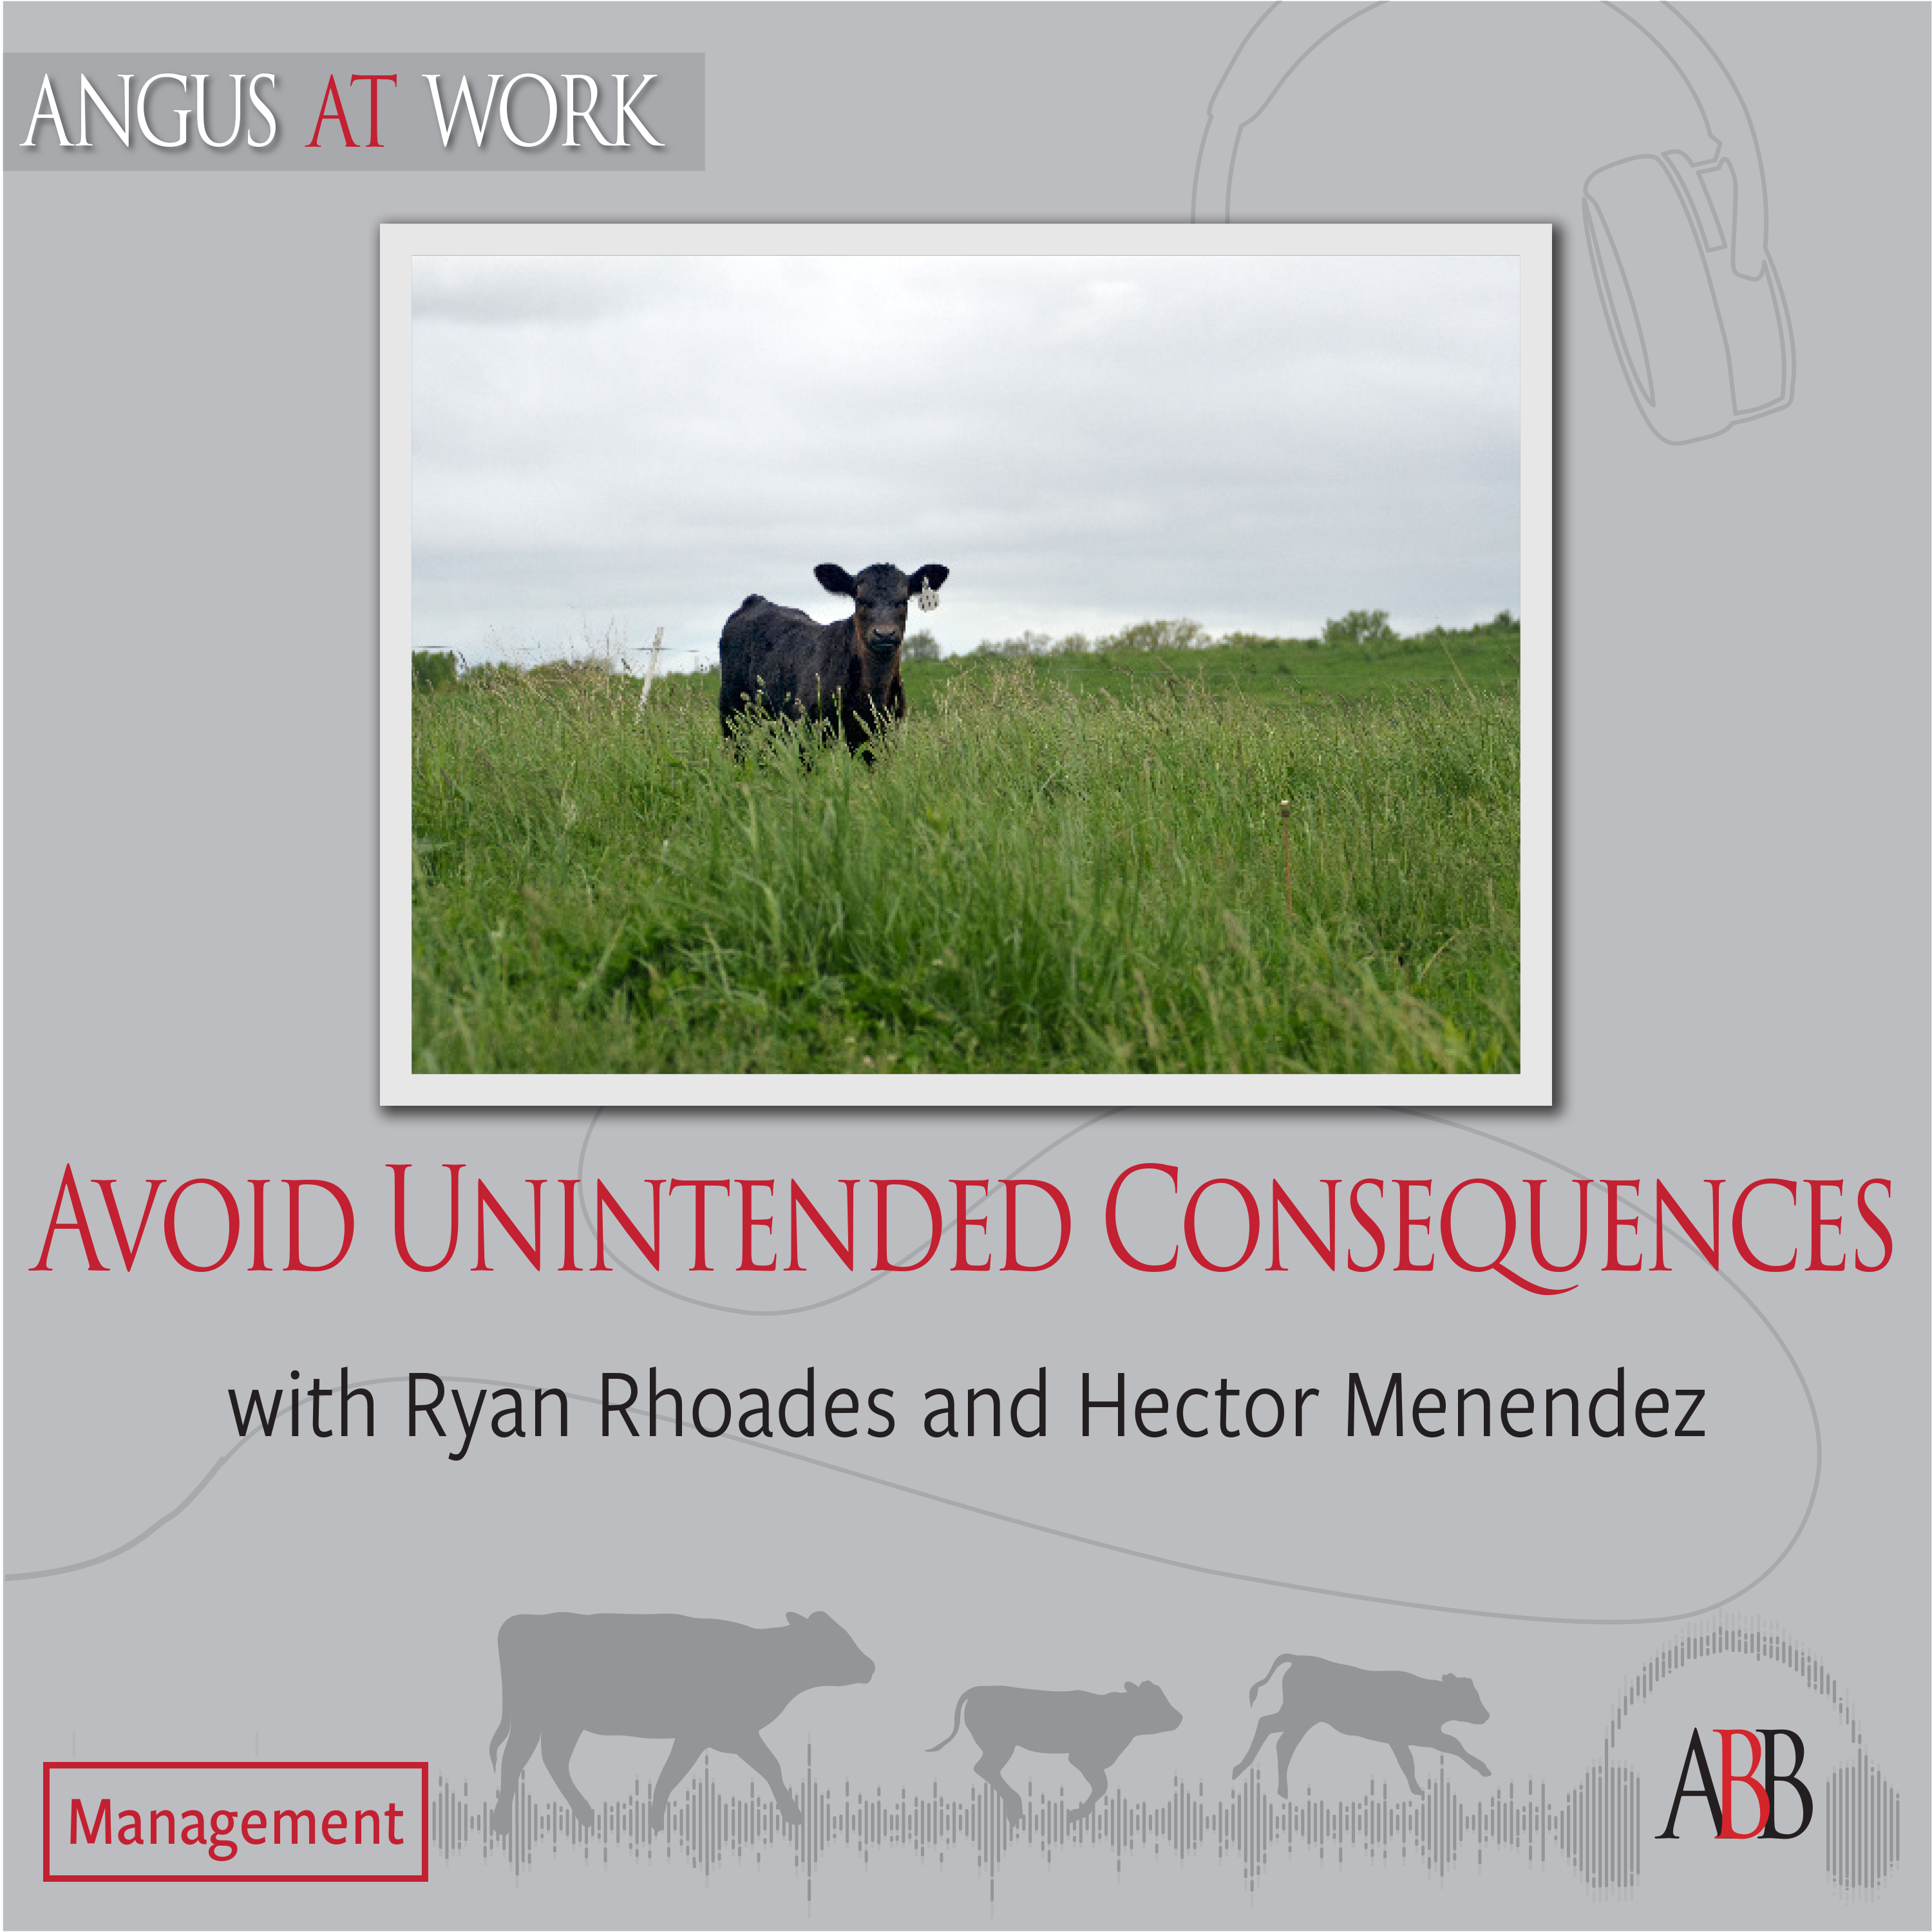 Avoid unintended consequences